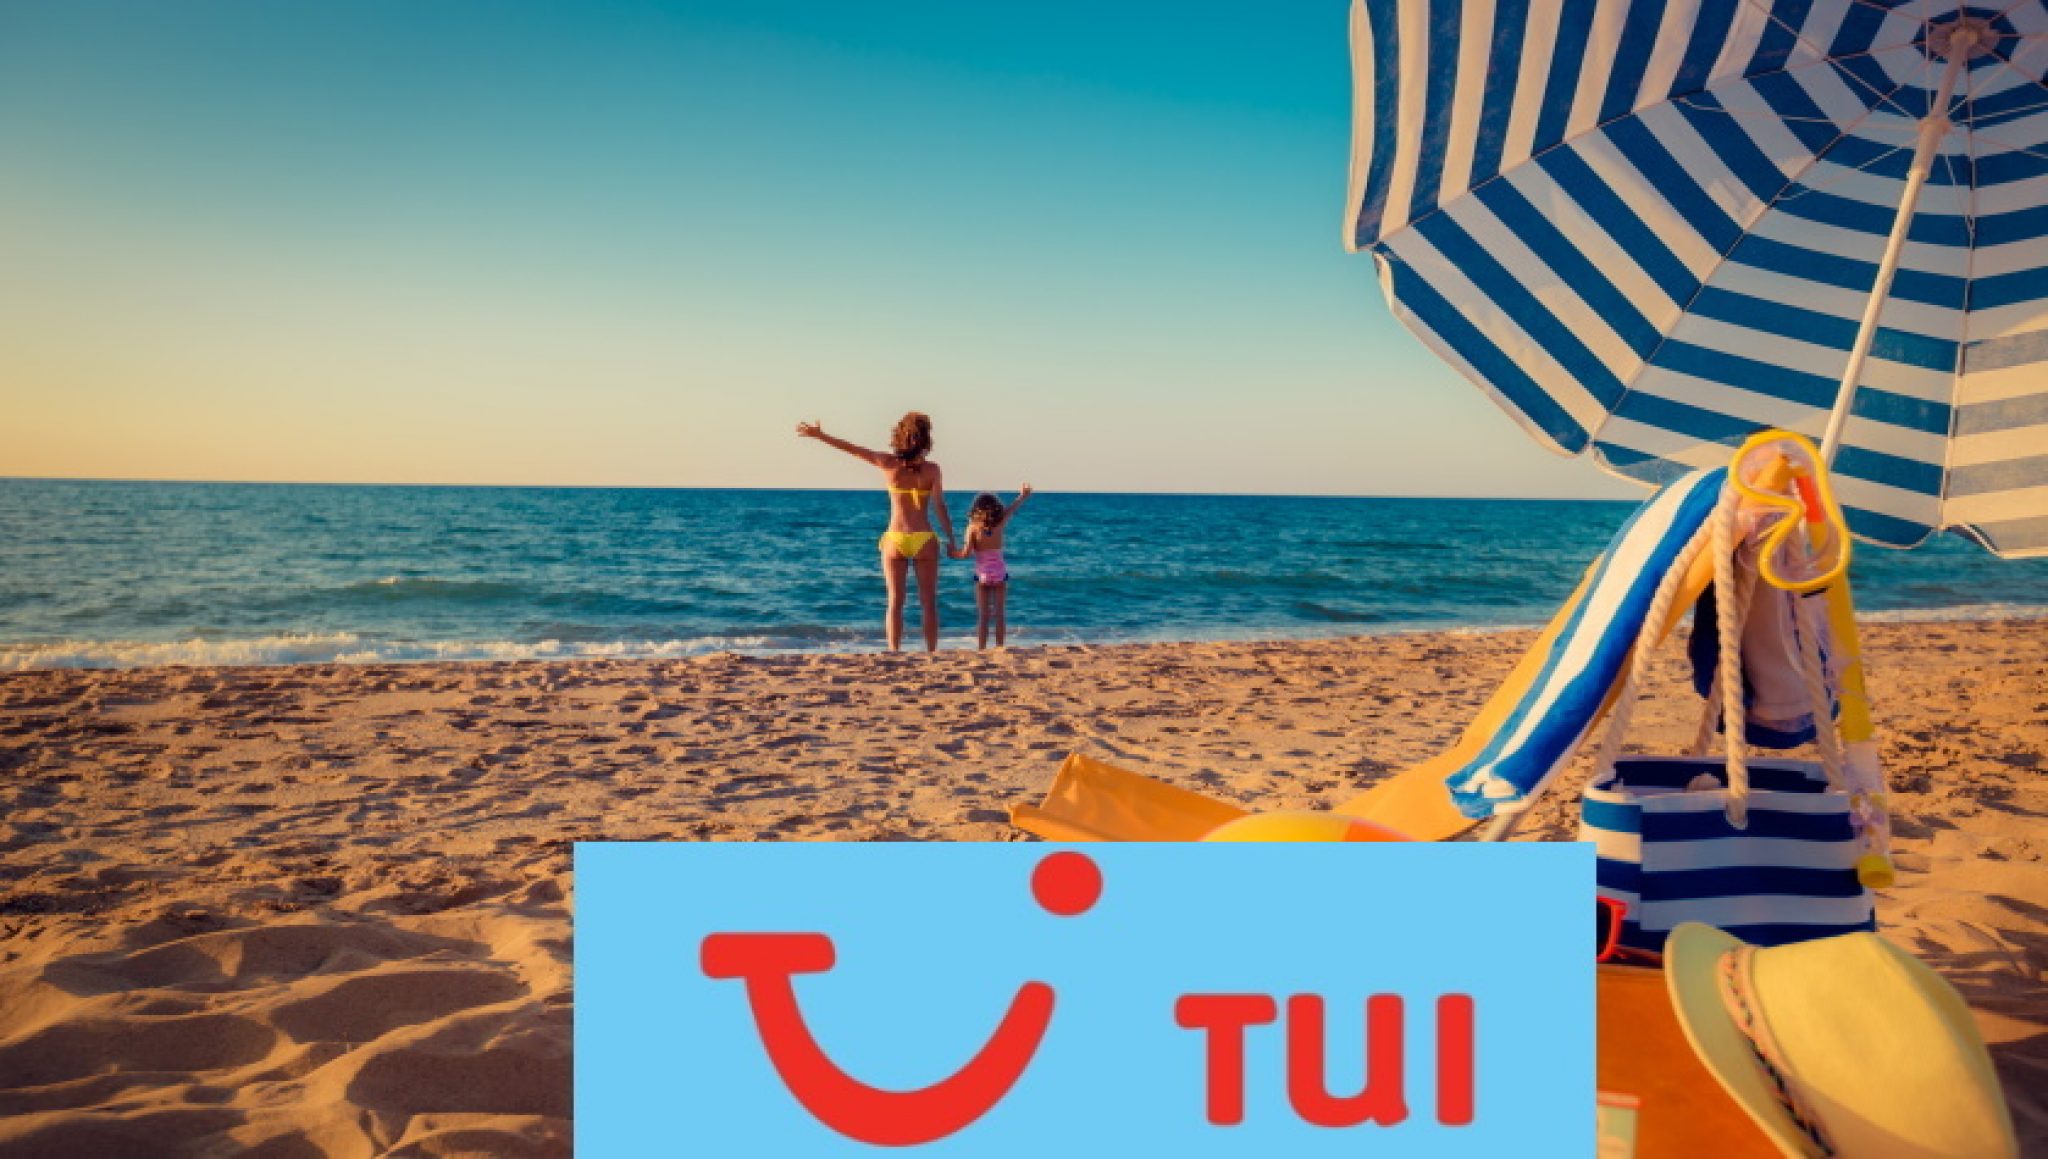 TUI Student discount Can I get money off a flight, holiday or hotel?